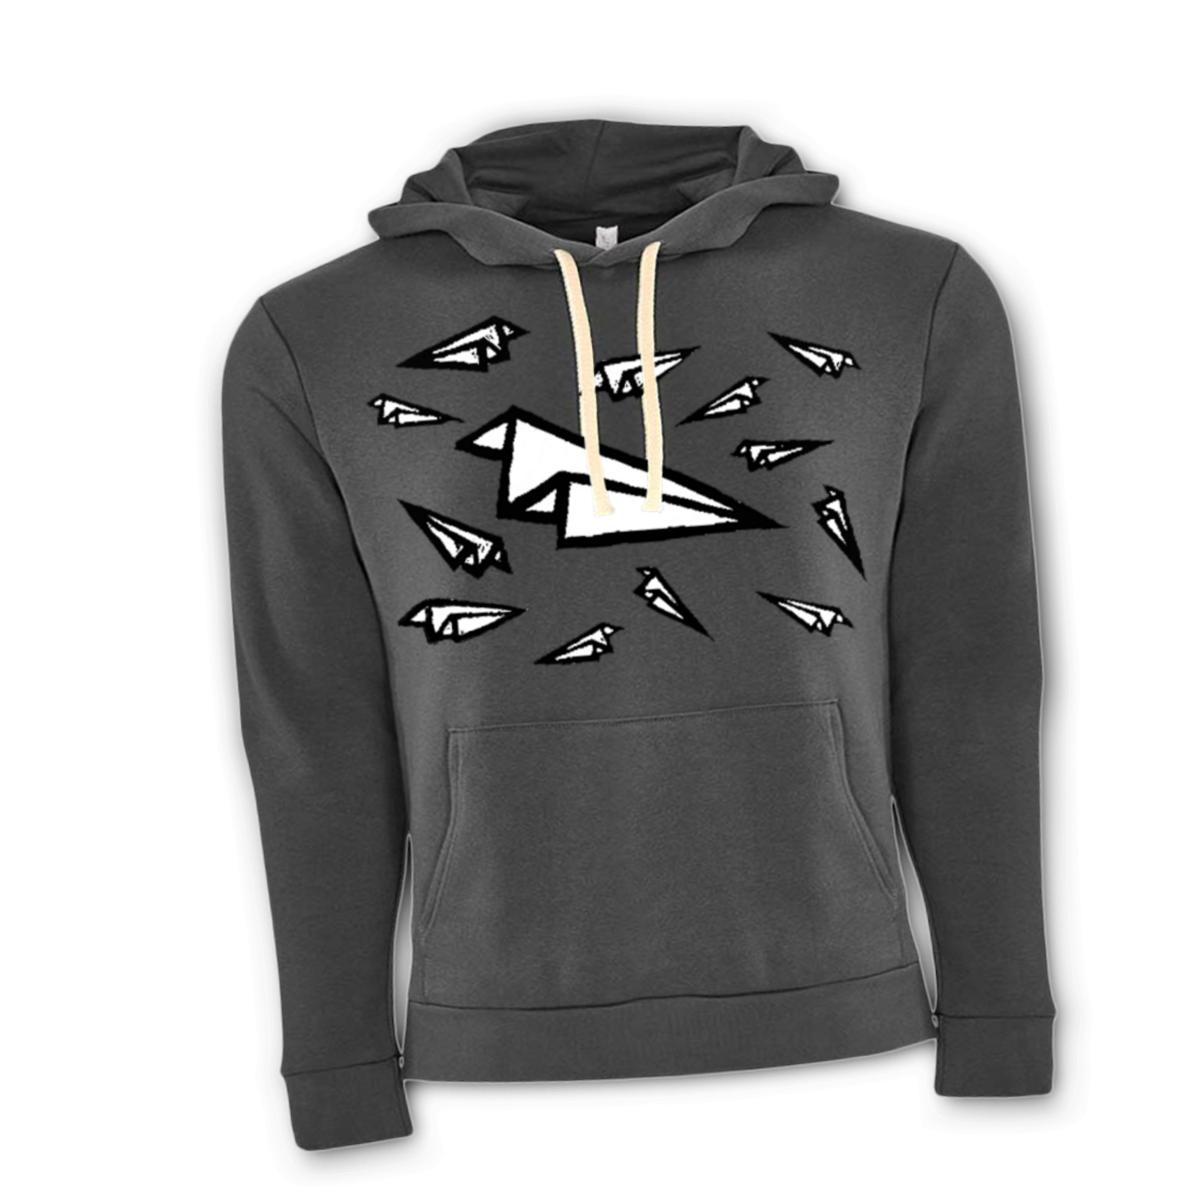 Airplane Frenzy Unisex Pullover Hoodie Small heavy-metal